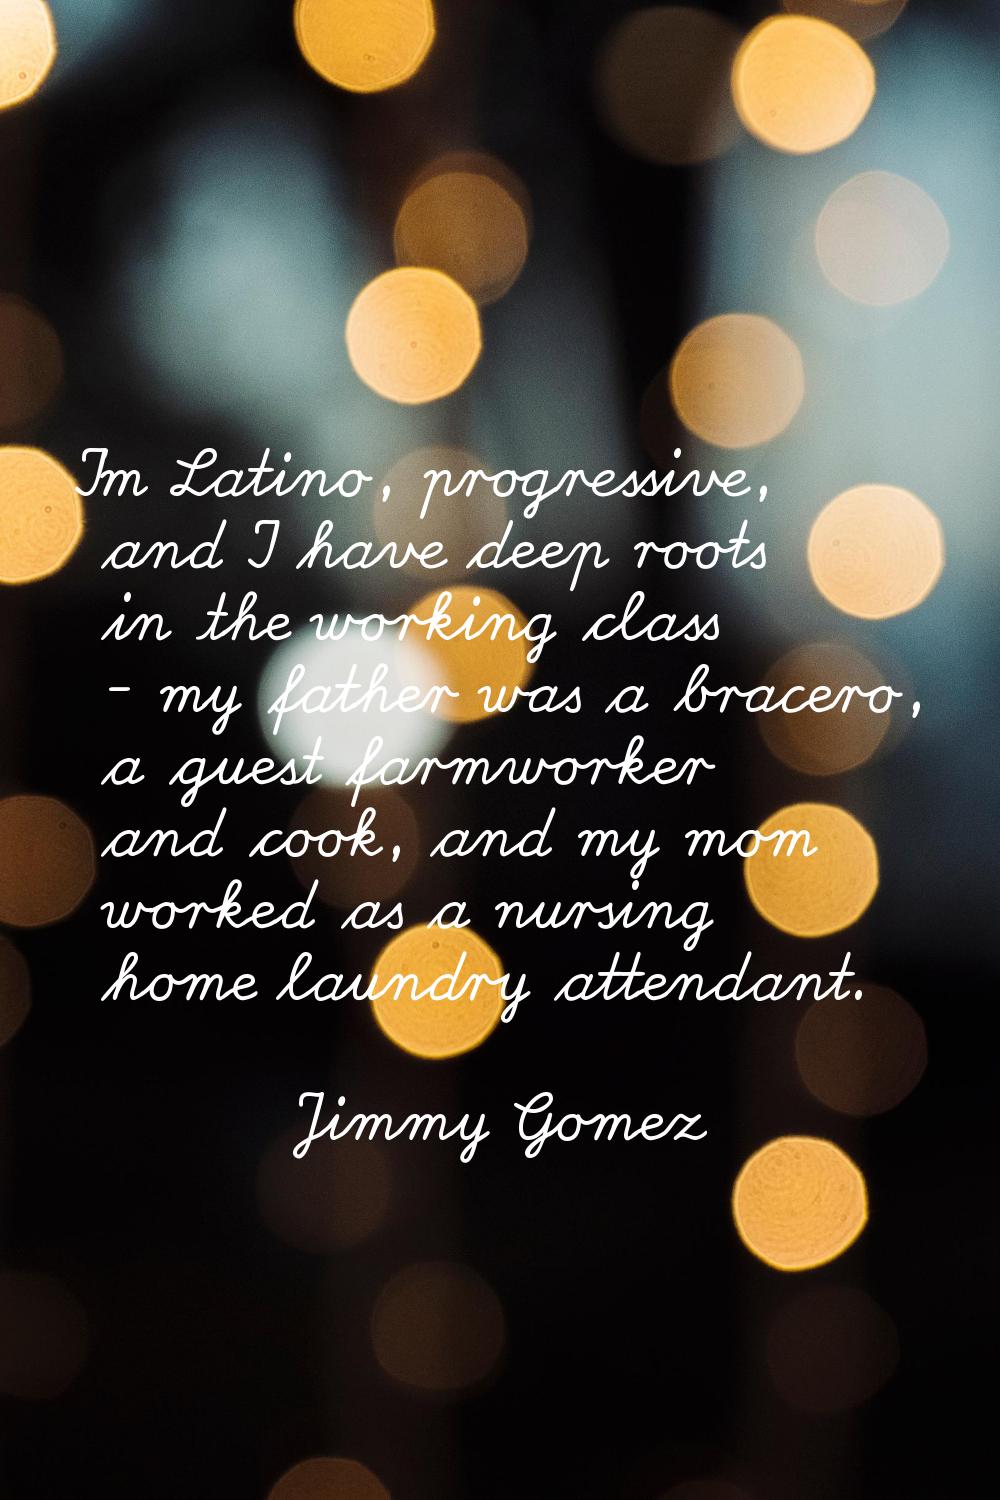 I'm Latino, progressive, and I have deep roots in the working class - my father was a bracero, a gu